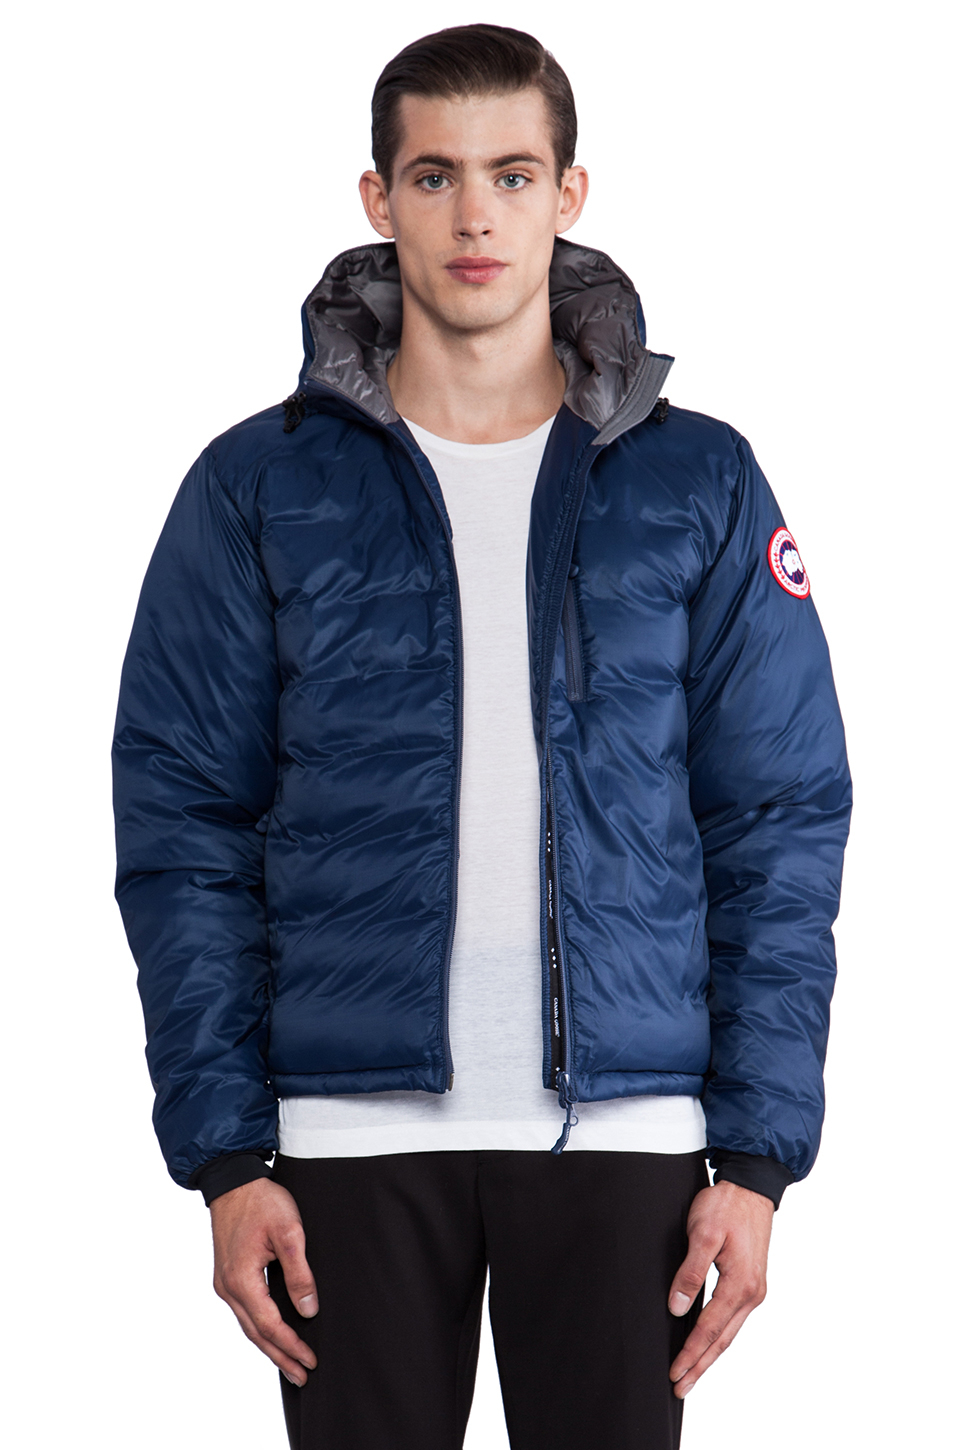 Canada Goose Lodge Jacket Admiral Blue Clearance, 59% OFF |  www.visitmontanejos.com